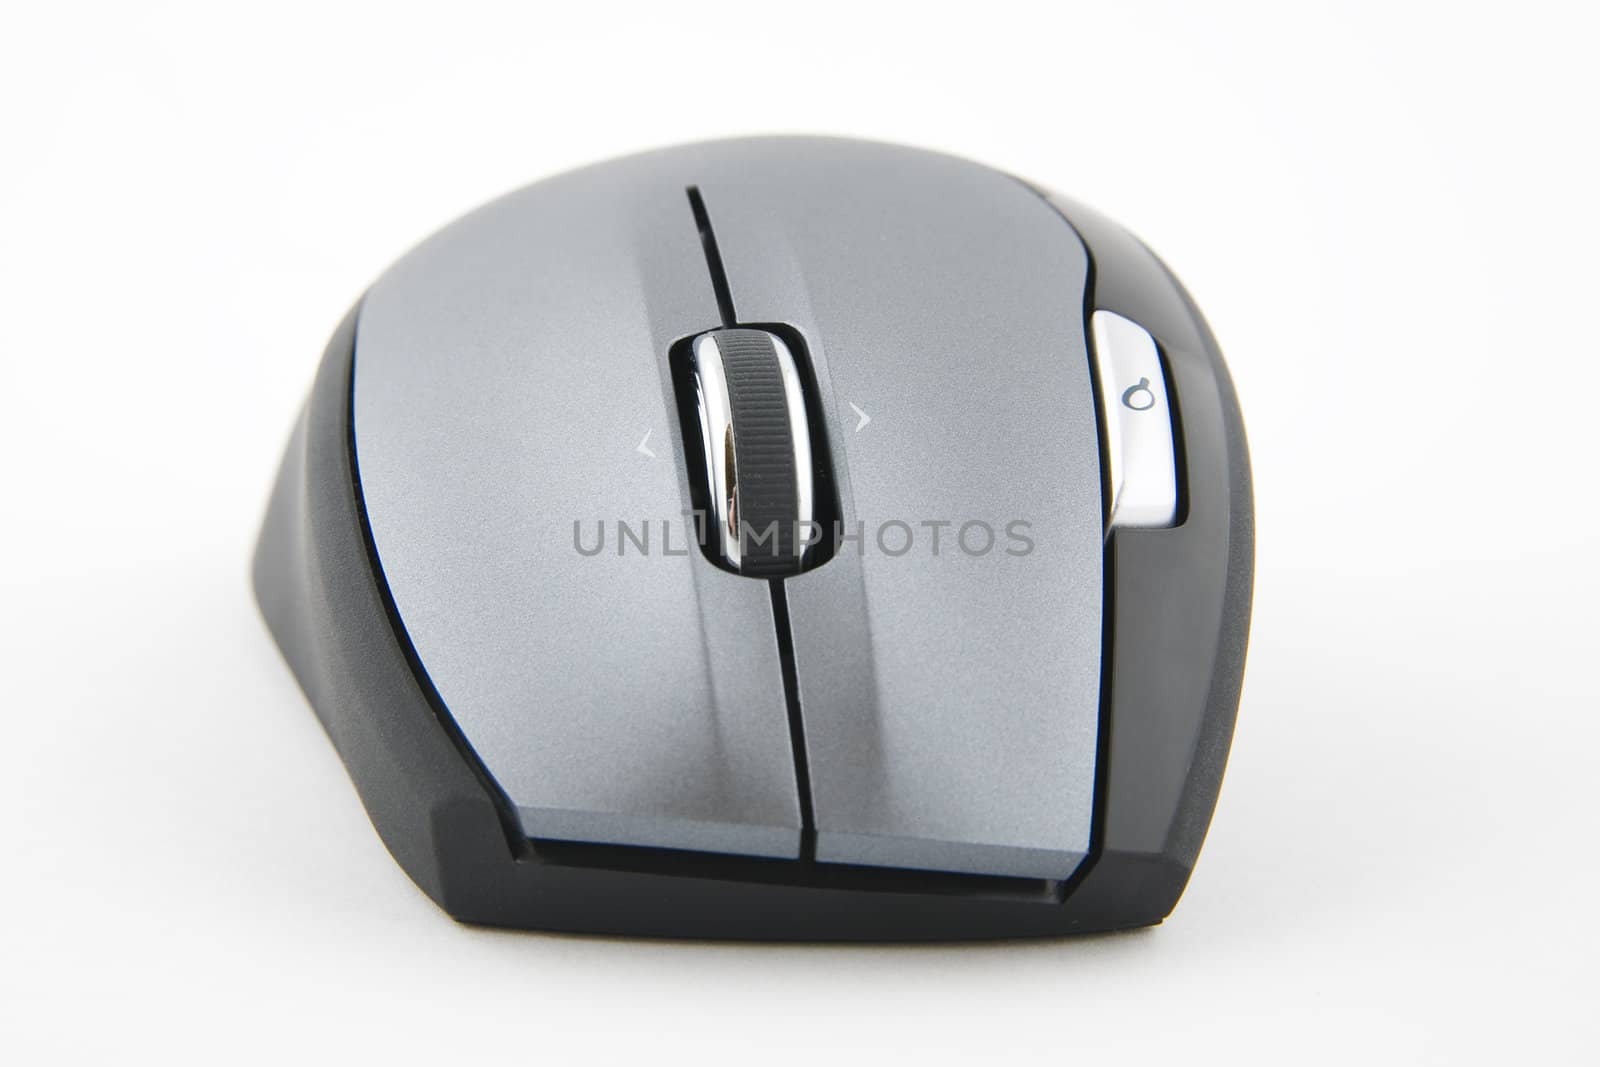 cordless computer mouse on very light background